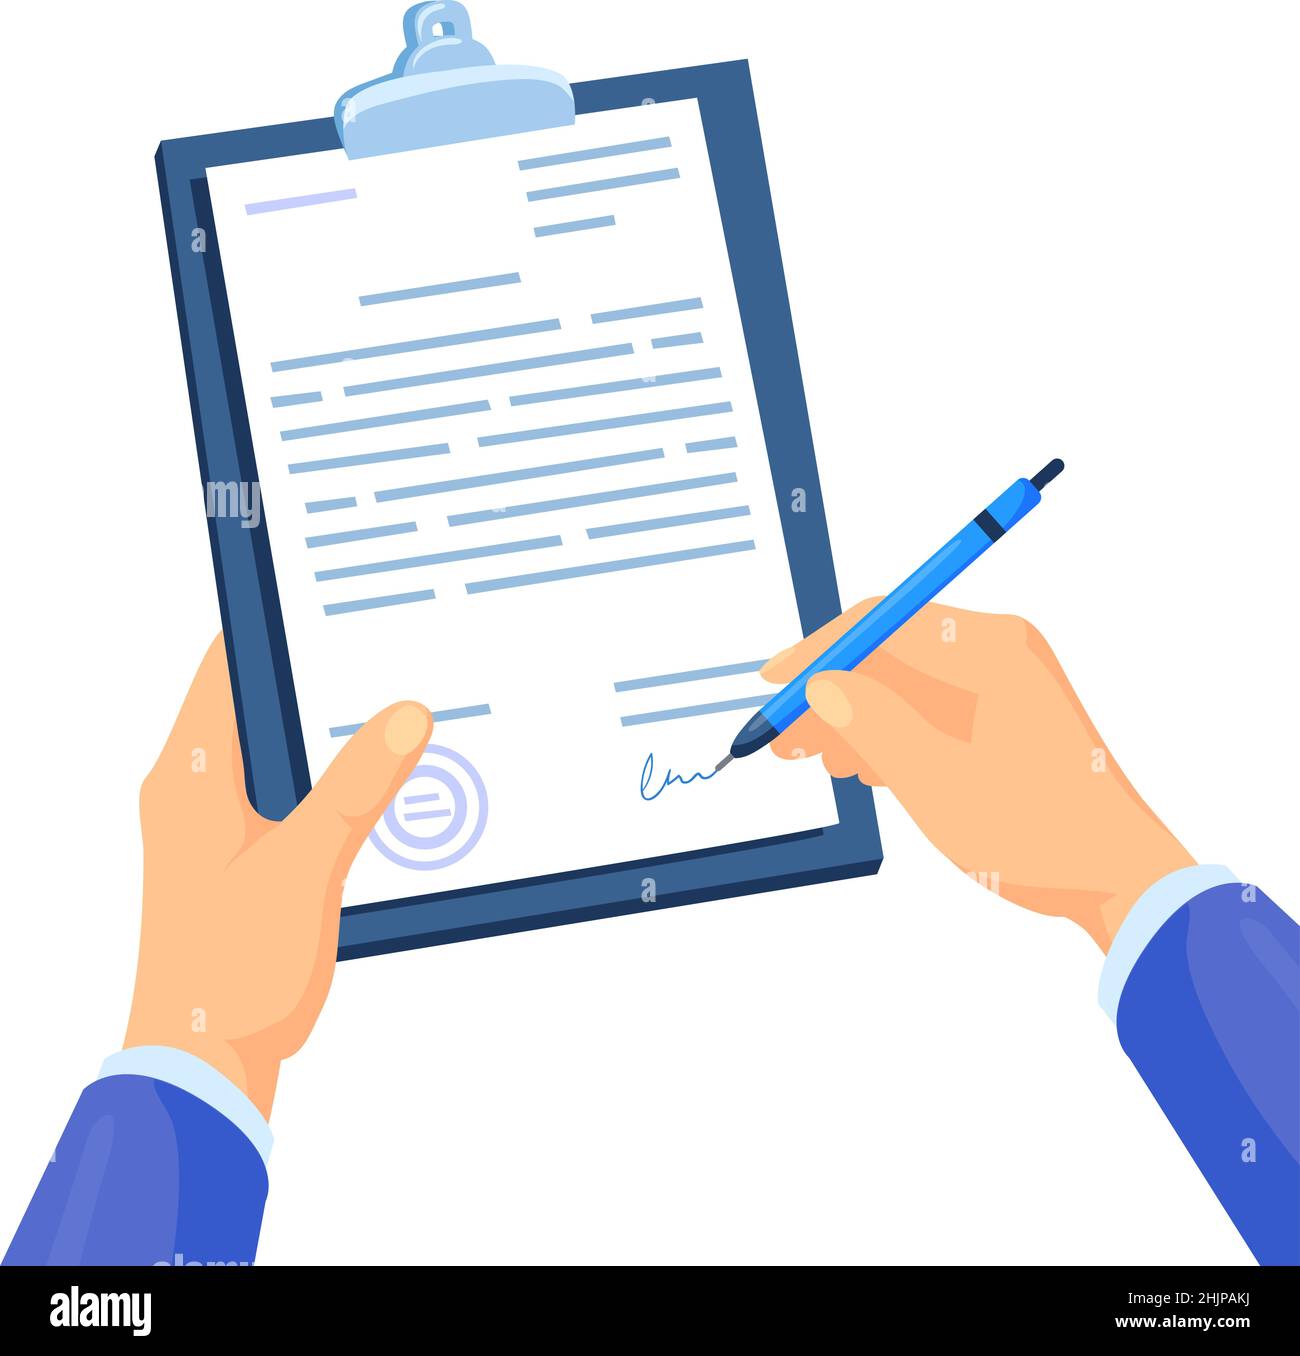 Lawyer signing certification. Contract signature, hand with pen sign paper document, symbol job certificate or legal agreement, cartoon vector illustration. Agreement contract, signature document Stock Vector